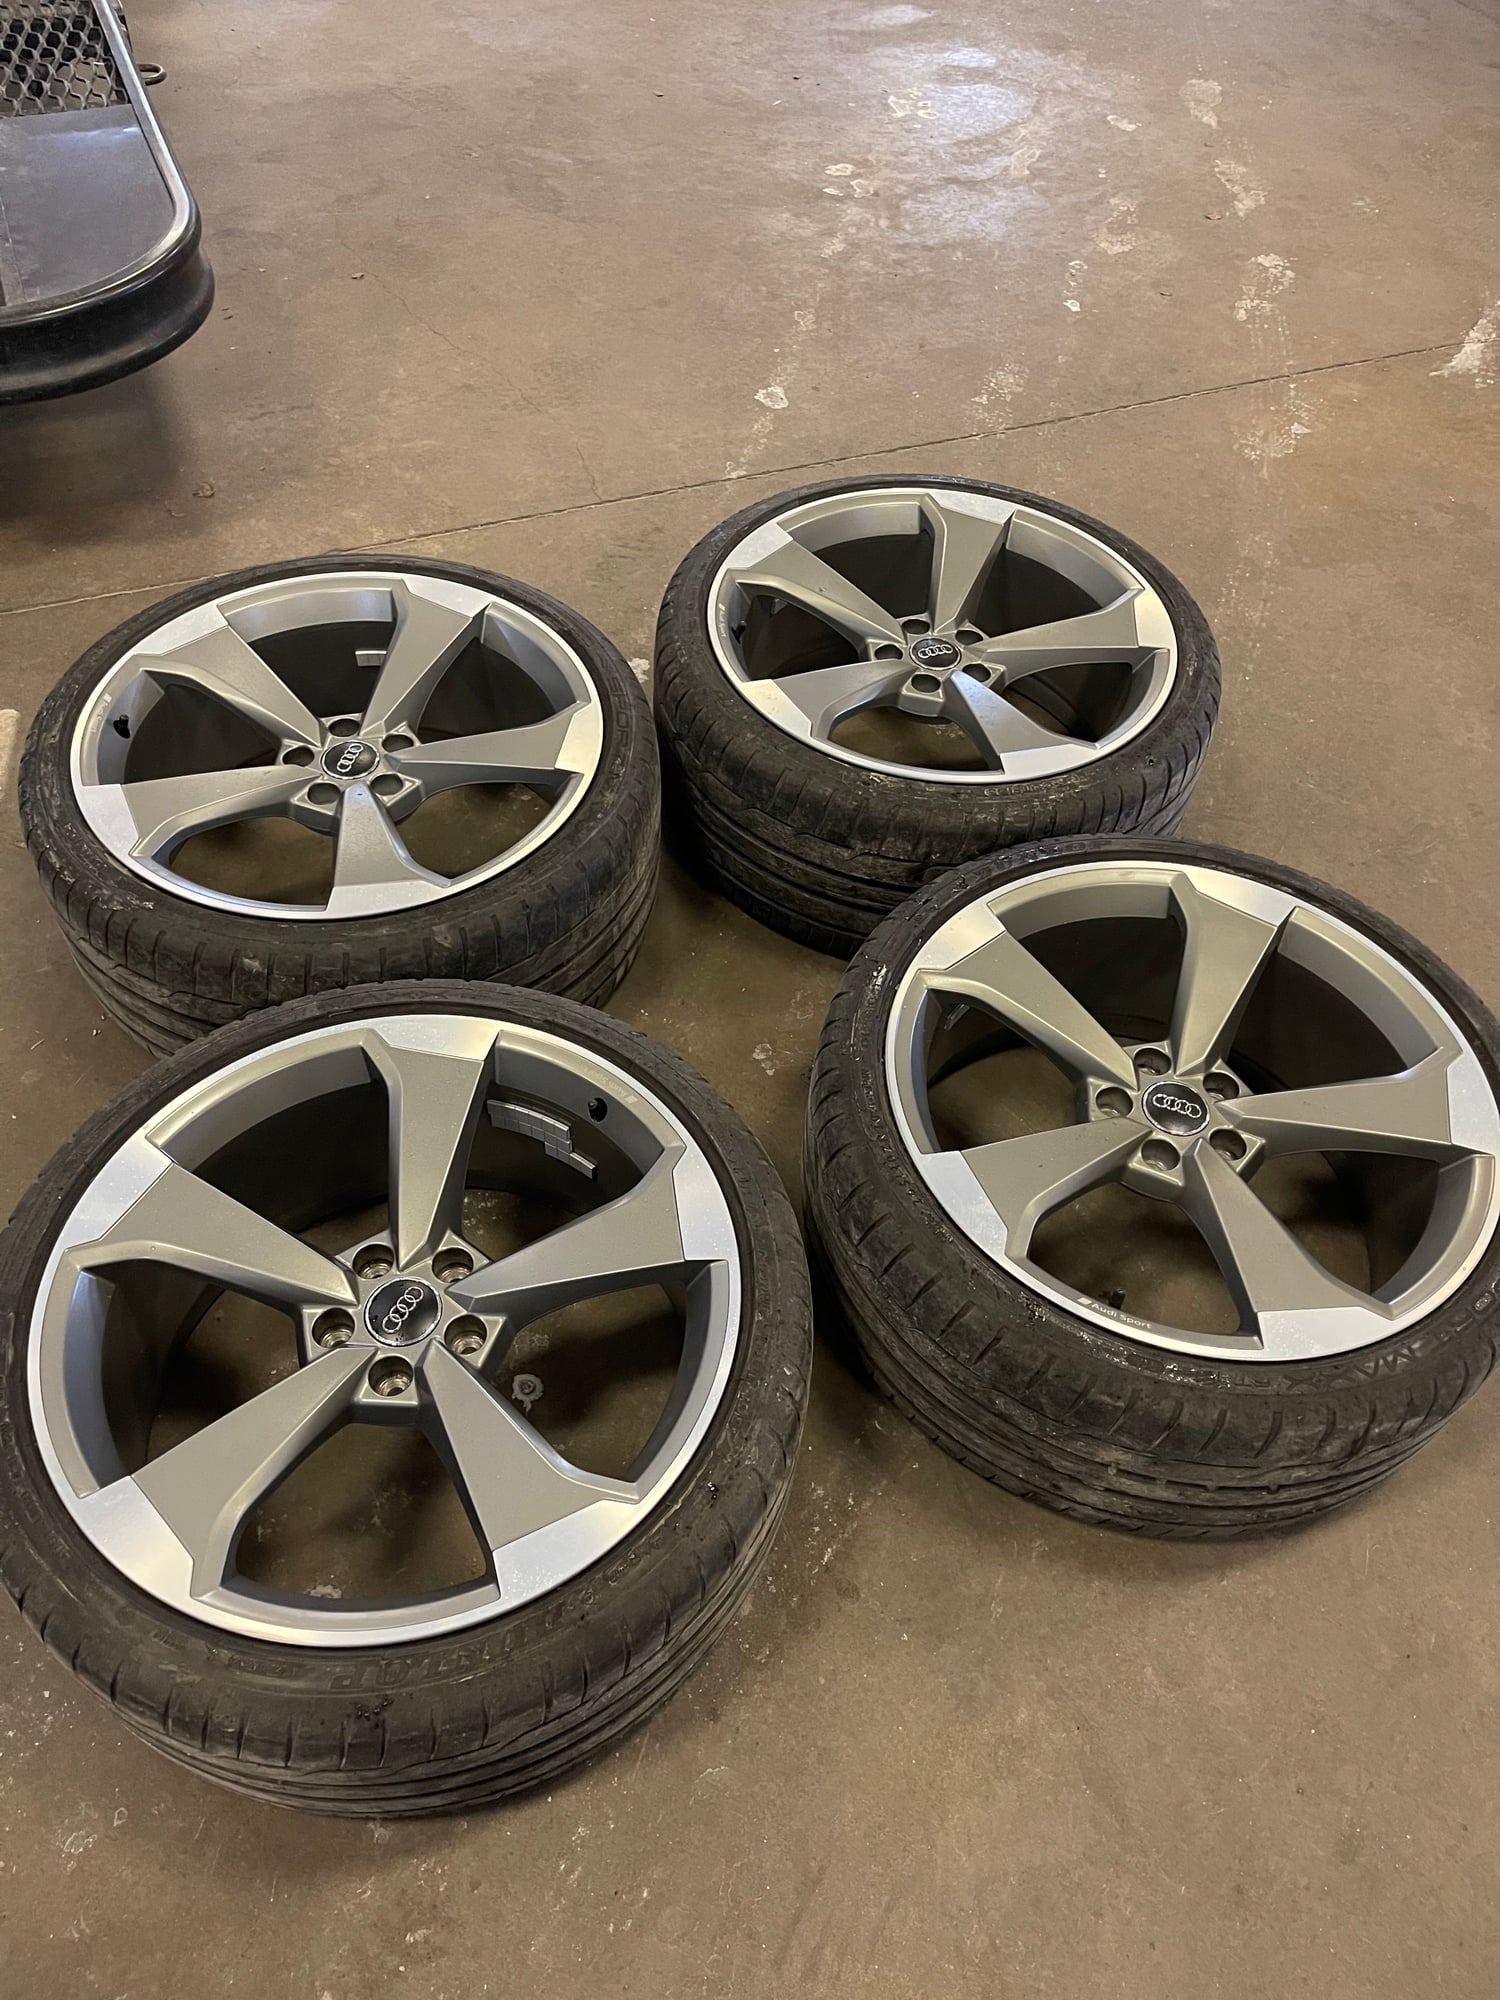 Wheels and Tires/Axles - OEM 20” 5 arm rotor wheels 2019 MINT - Used - 0  All Models - Allentown, PA 18104, United States